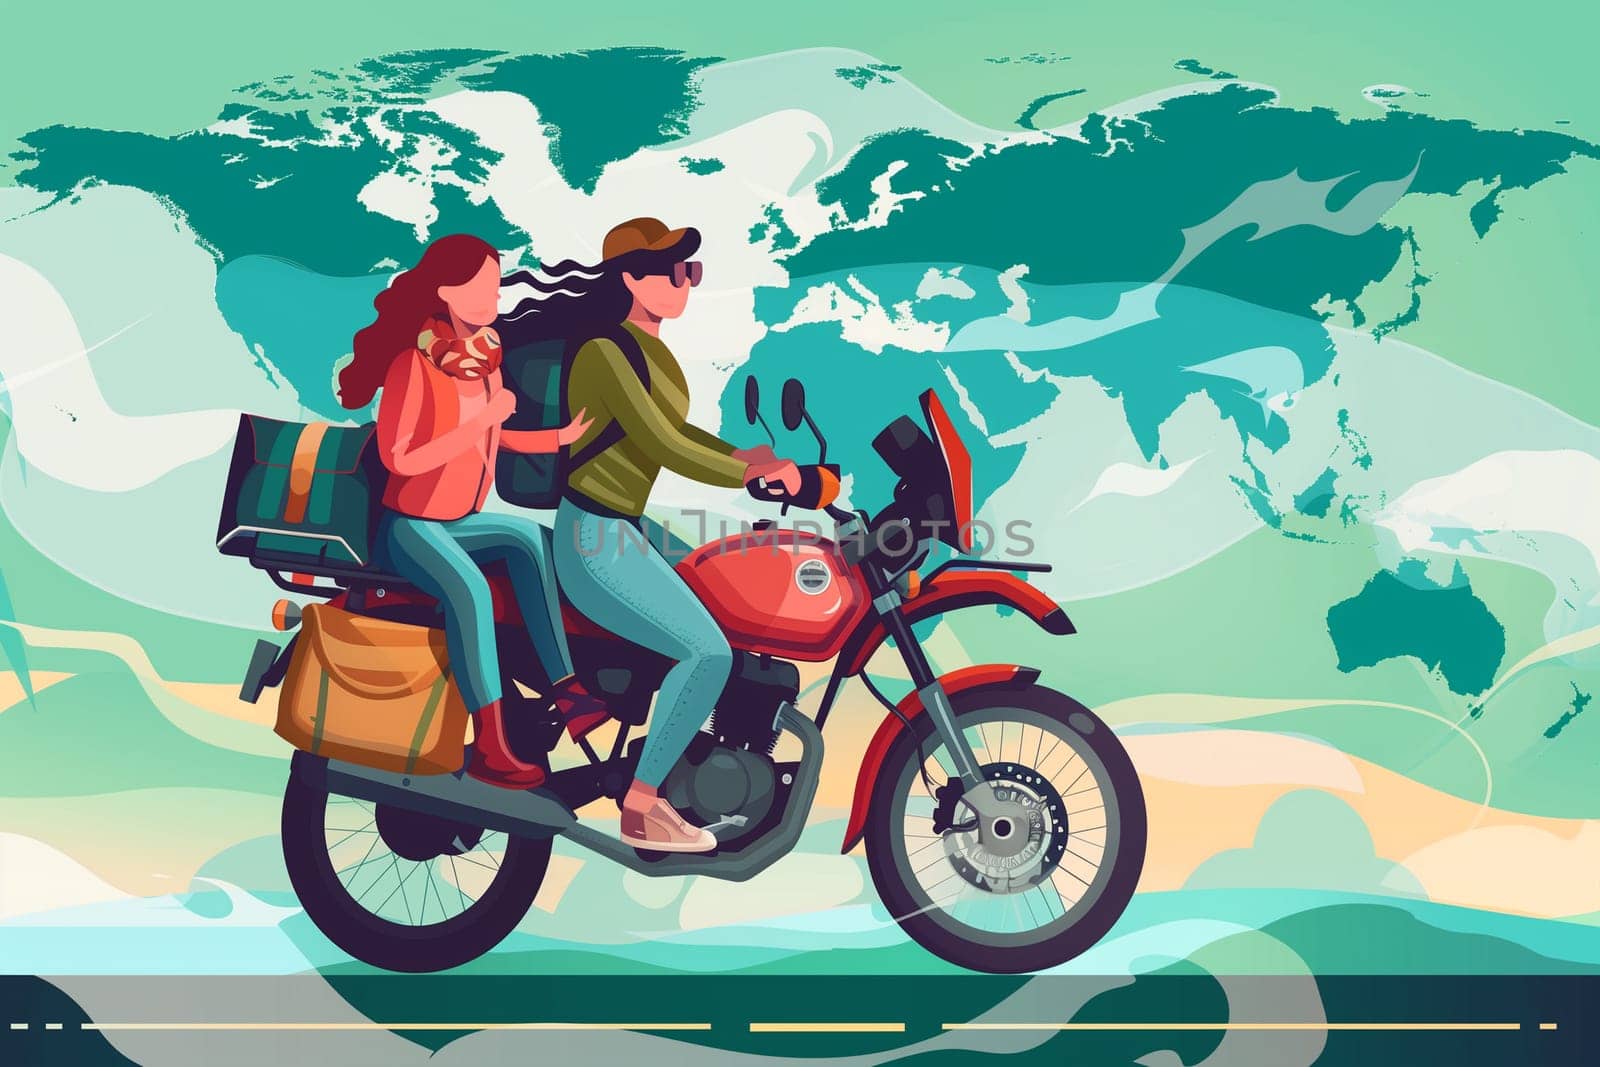 Two People Riding Motorcycle in Front of World Map by Sd28DimoN_1976